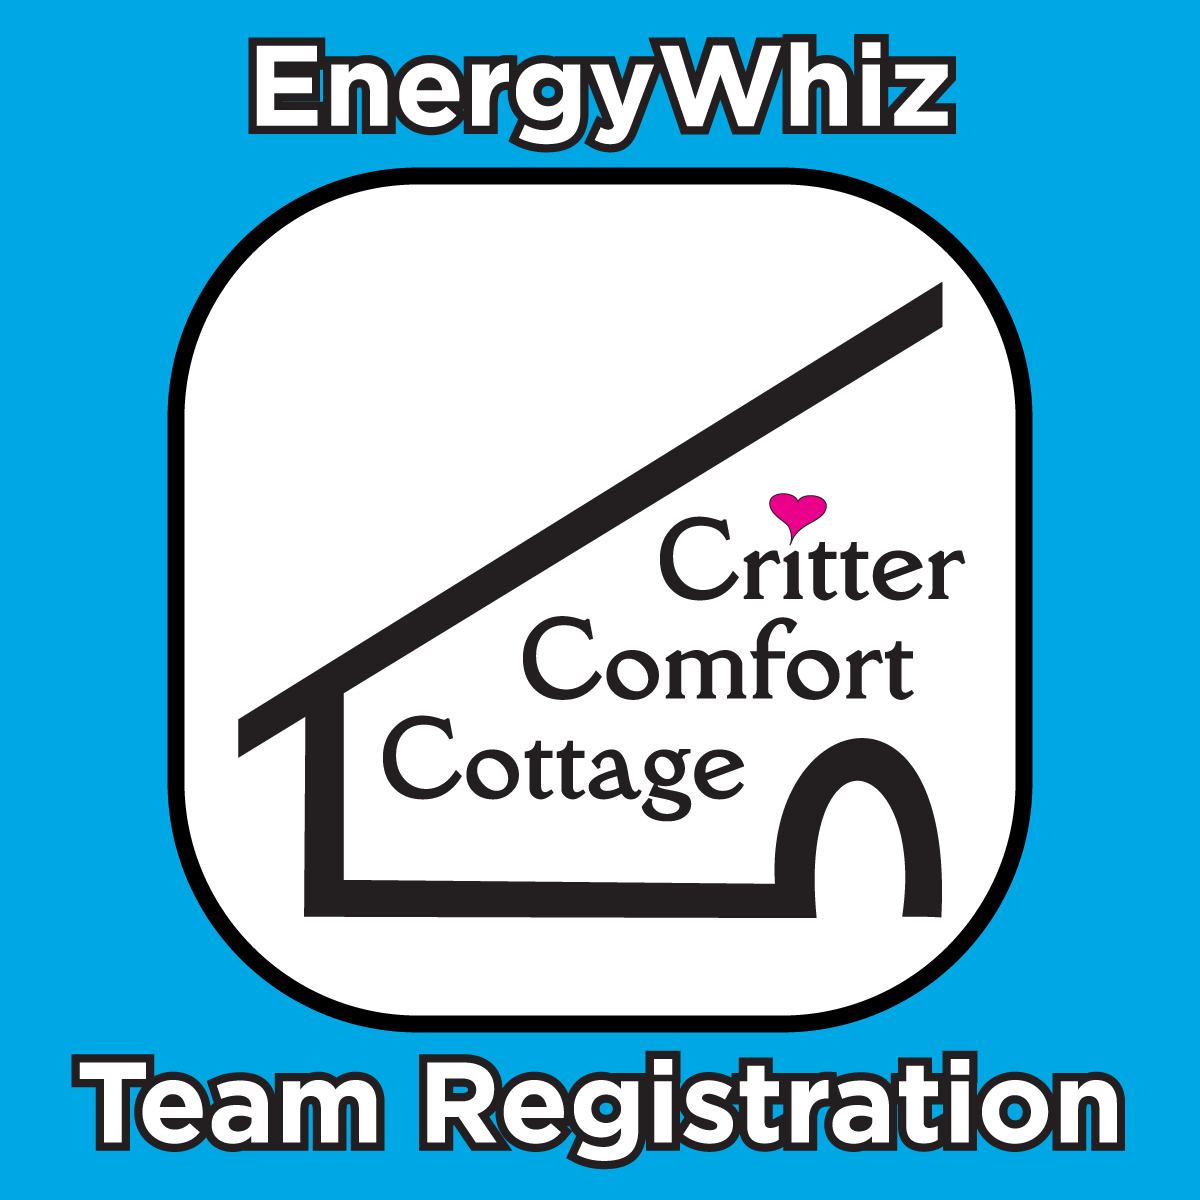 In-Person - Critter Comfort Cottage Team